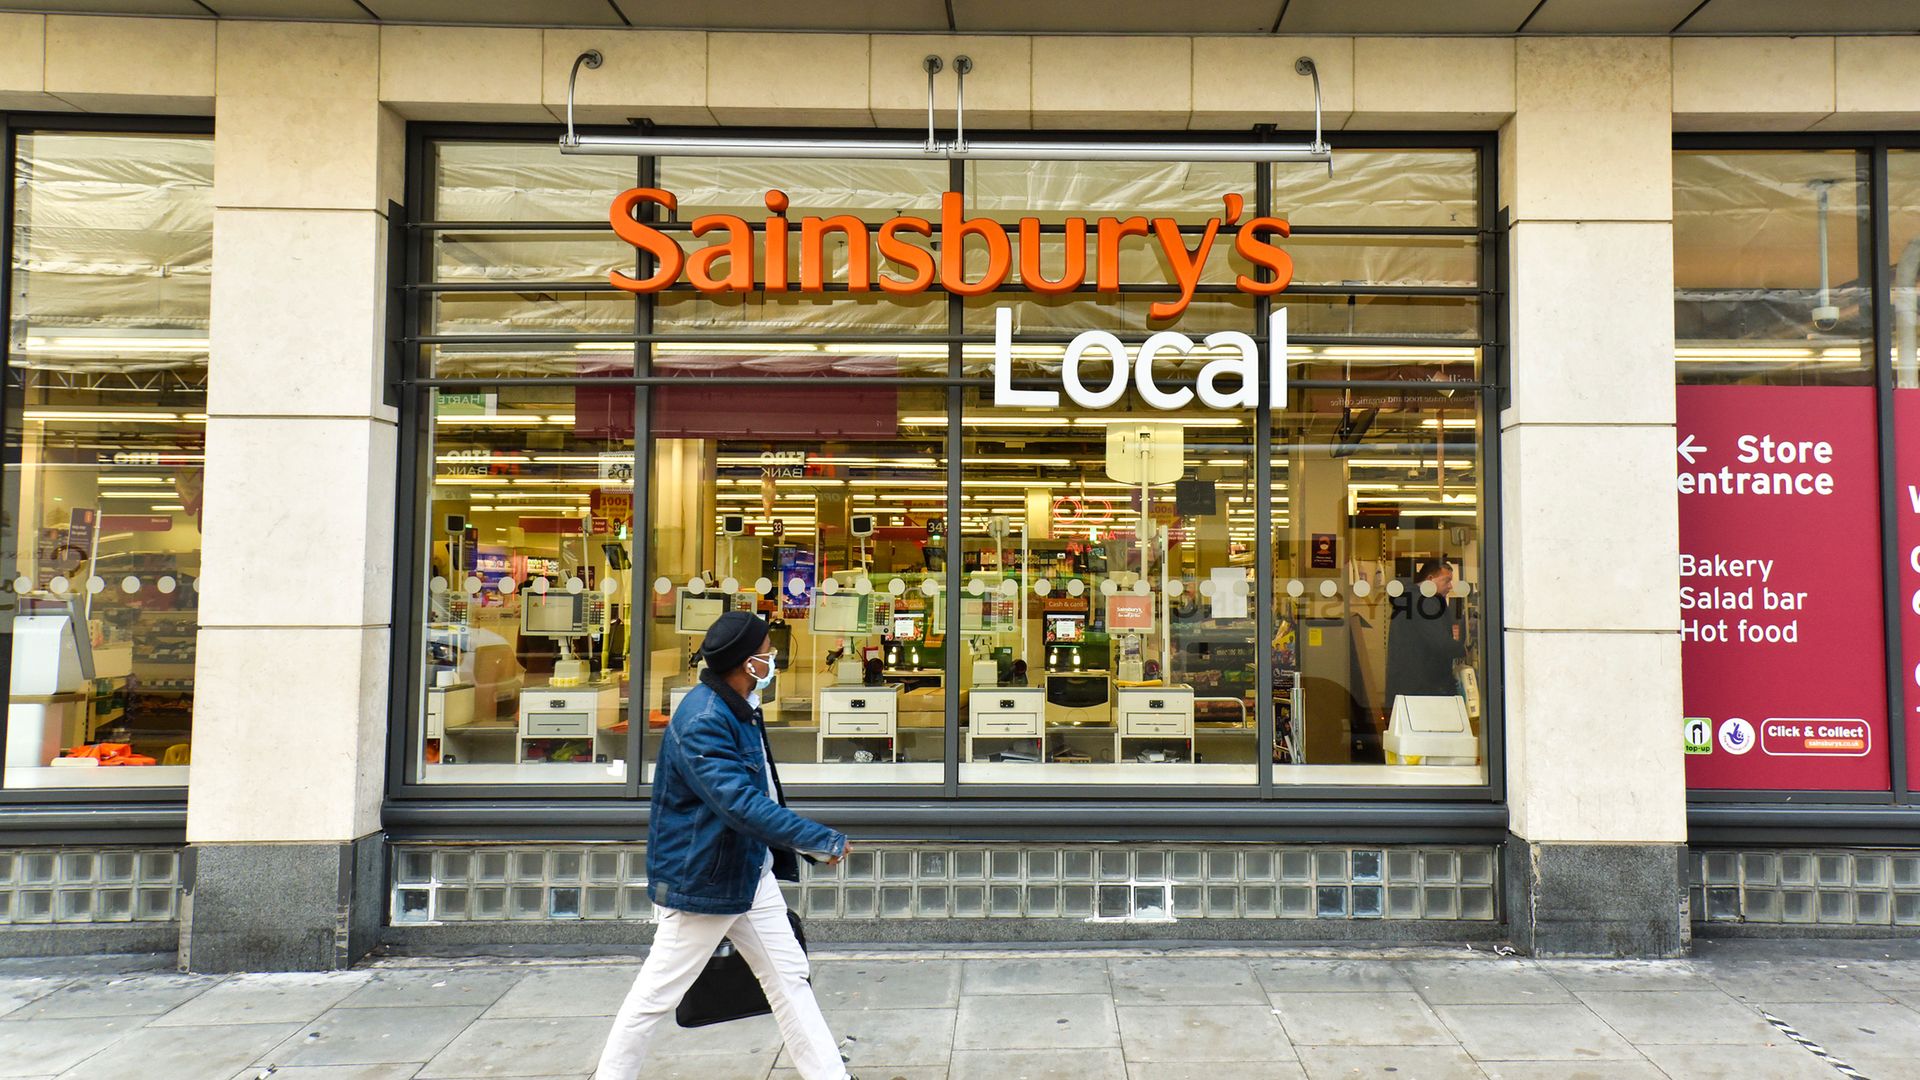 A man wearing a face mask walks past the Sainsburys shop in Holborn, London as the company announces it is cutting 3,500 jobs and closing 420 Argos stores - Credit: SOPA Images/LightRocket via Gett